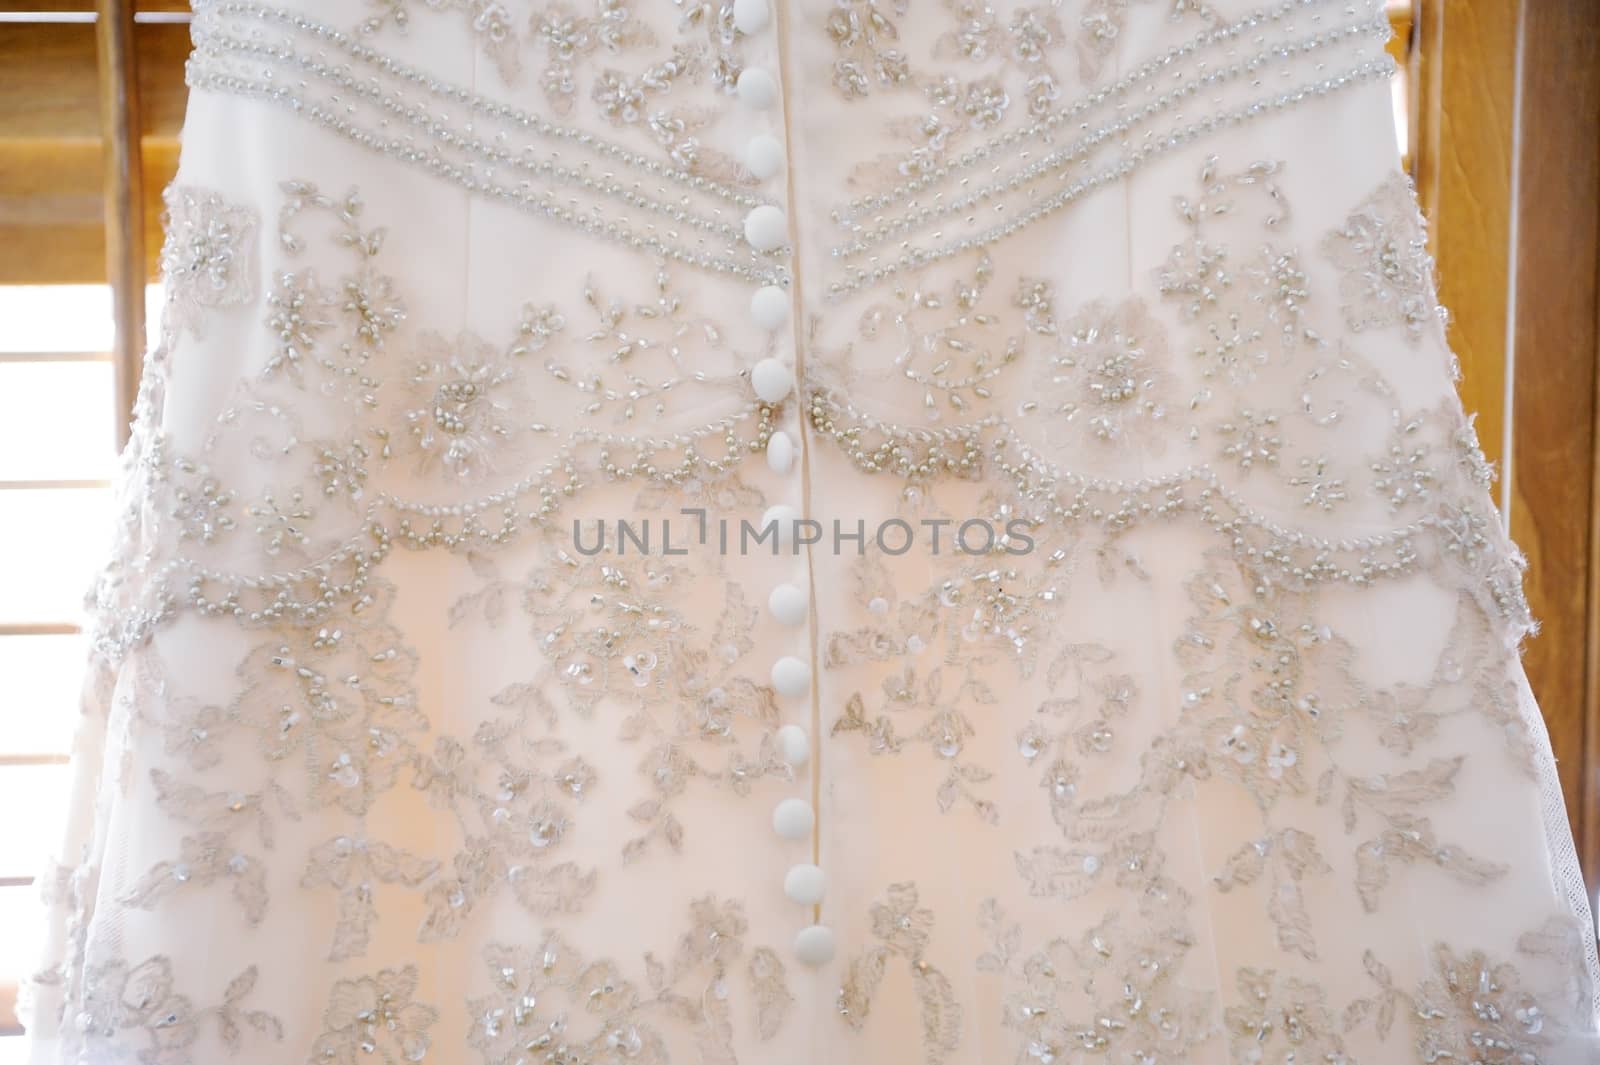 Brides dress close-up showing detail on wedding day